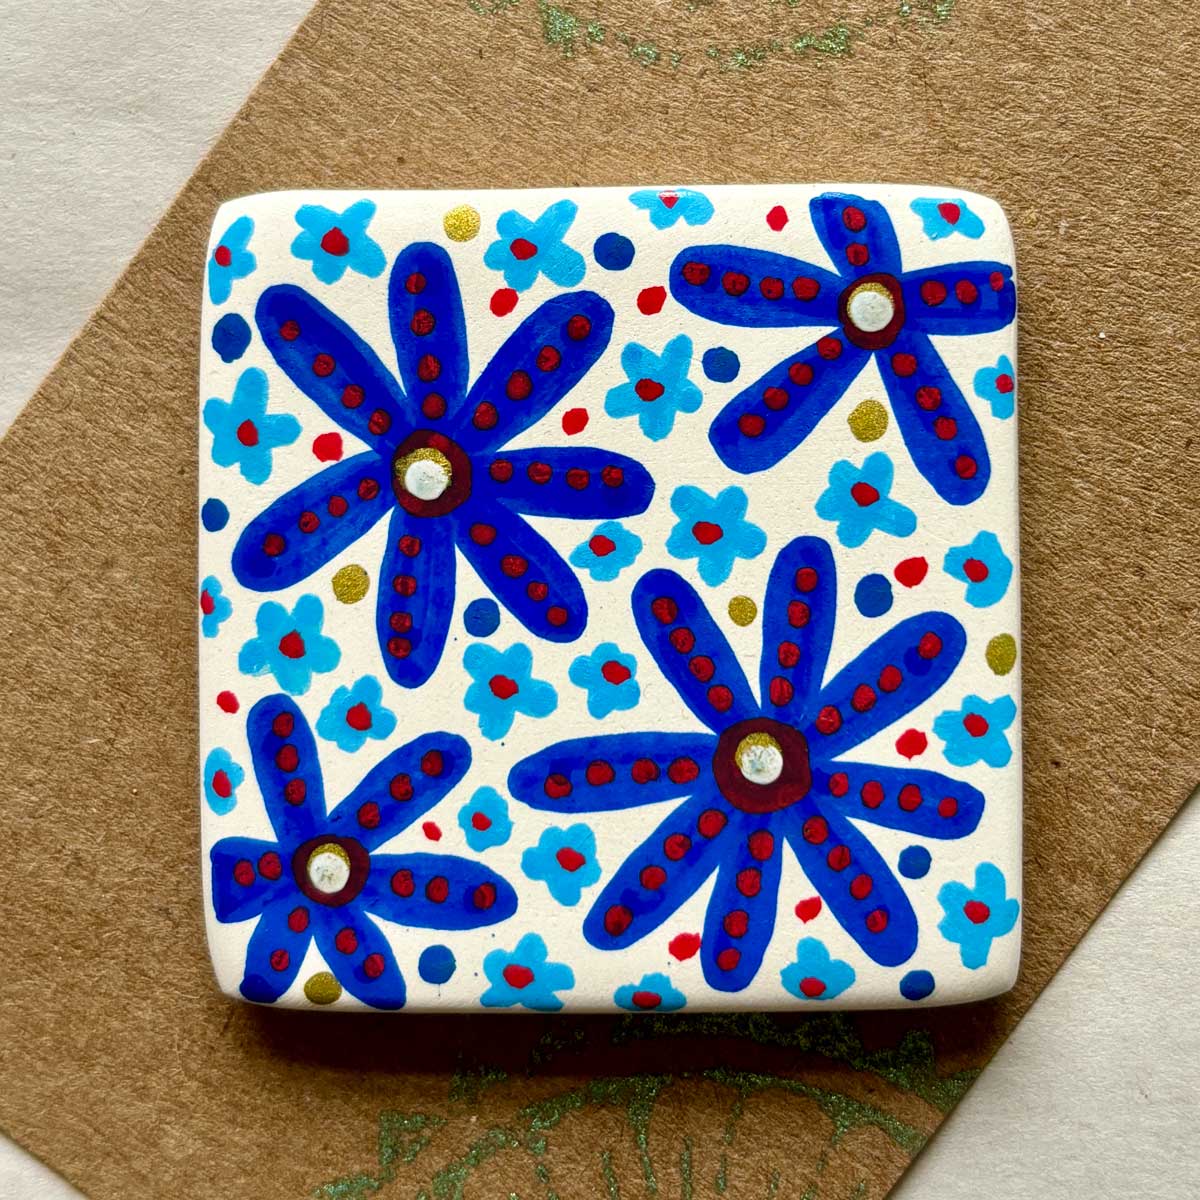 square ceramic brooch with hand painted blue floral pattern